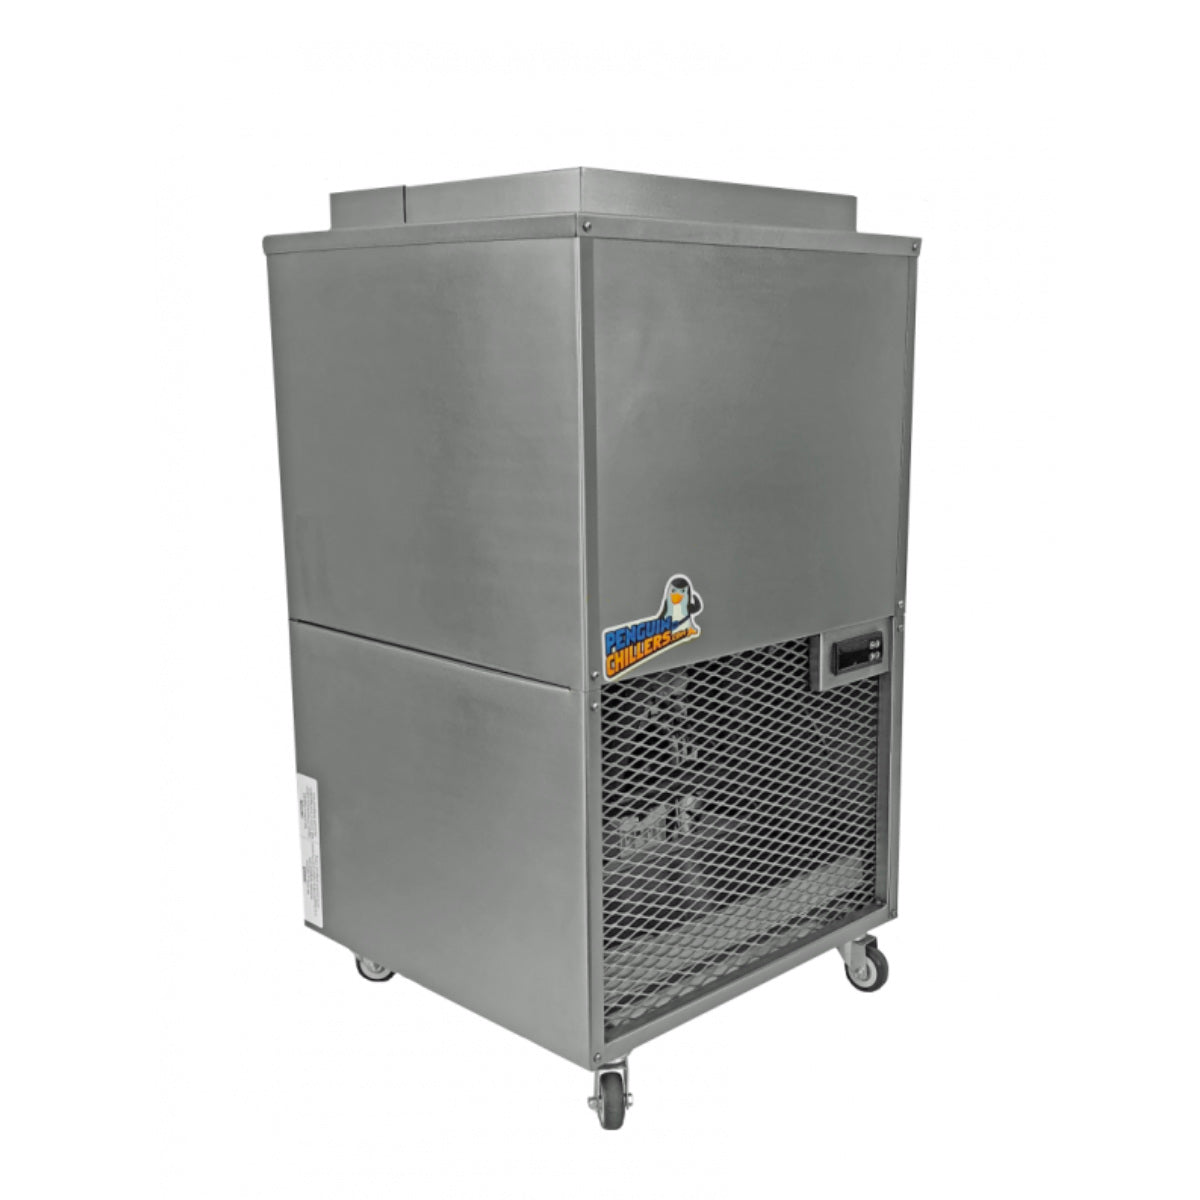 Water, Beer and Wort Chiller for home brewing systems